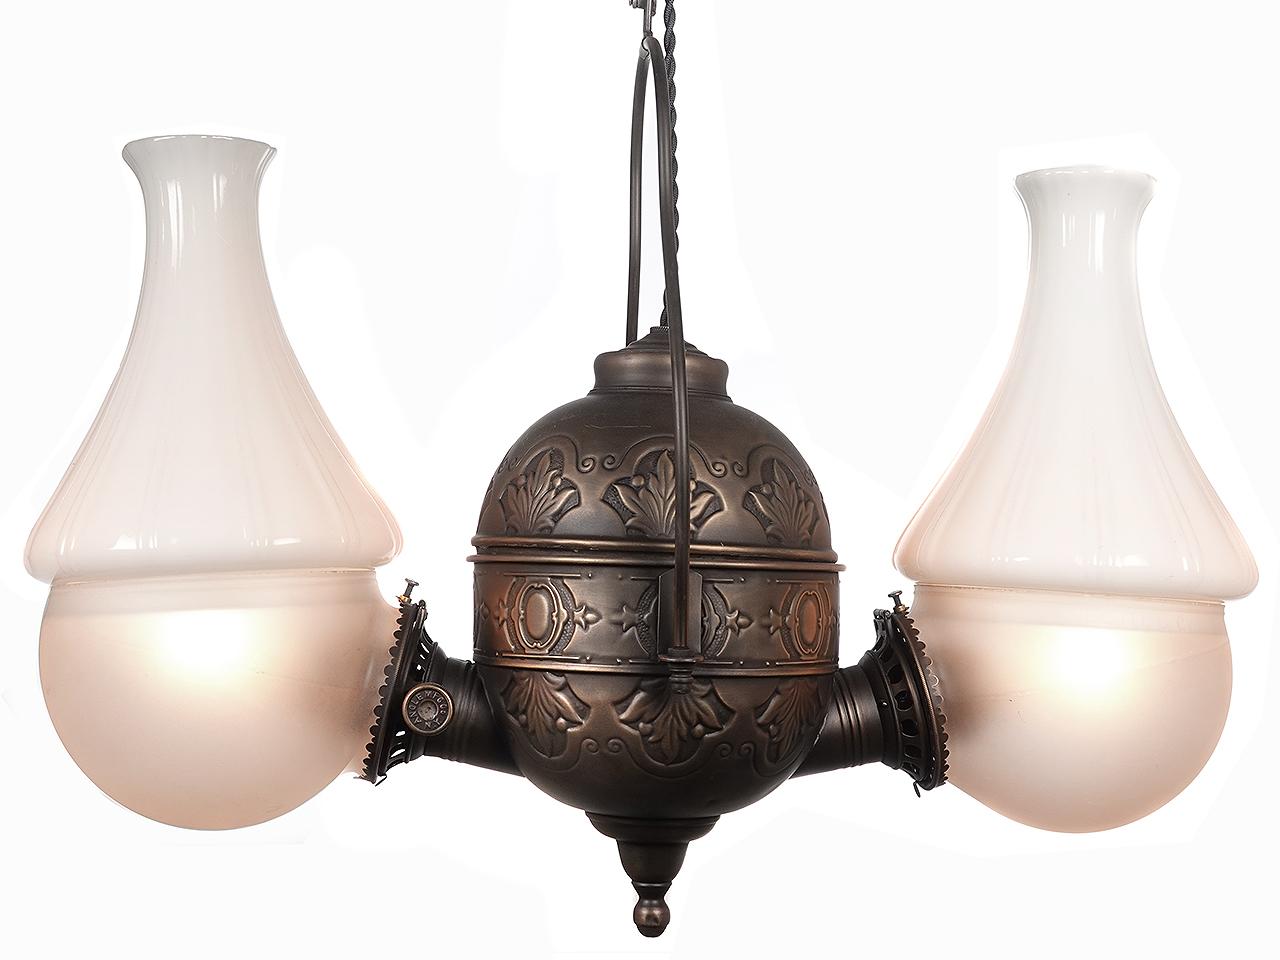 This style of double kerosene hanging lamp was popular in stores because it cast more light downward, and has been electrified. Signed, Angle Mfg., NY, this picturesque antique 1890's light has original glass and chimneys. The look of this lamp is